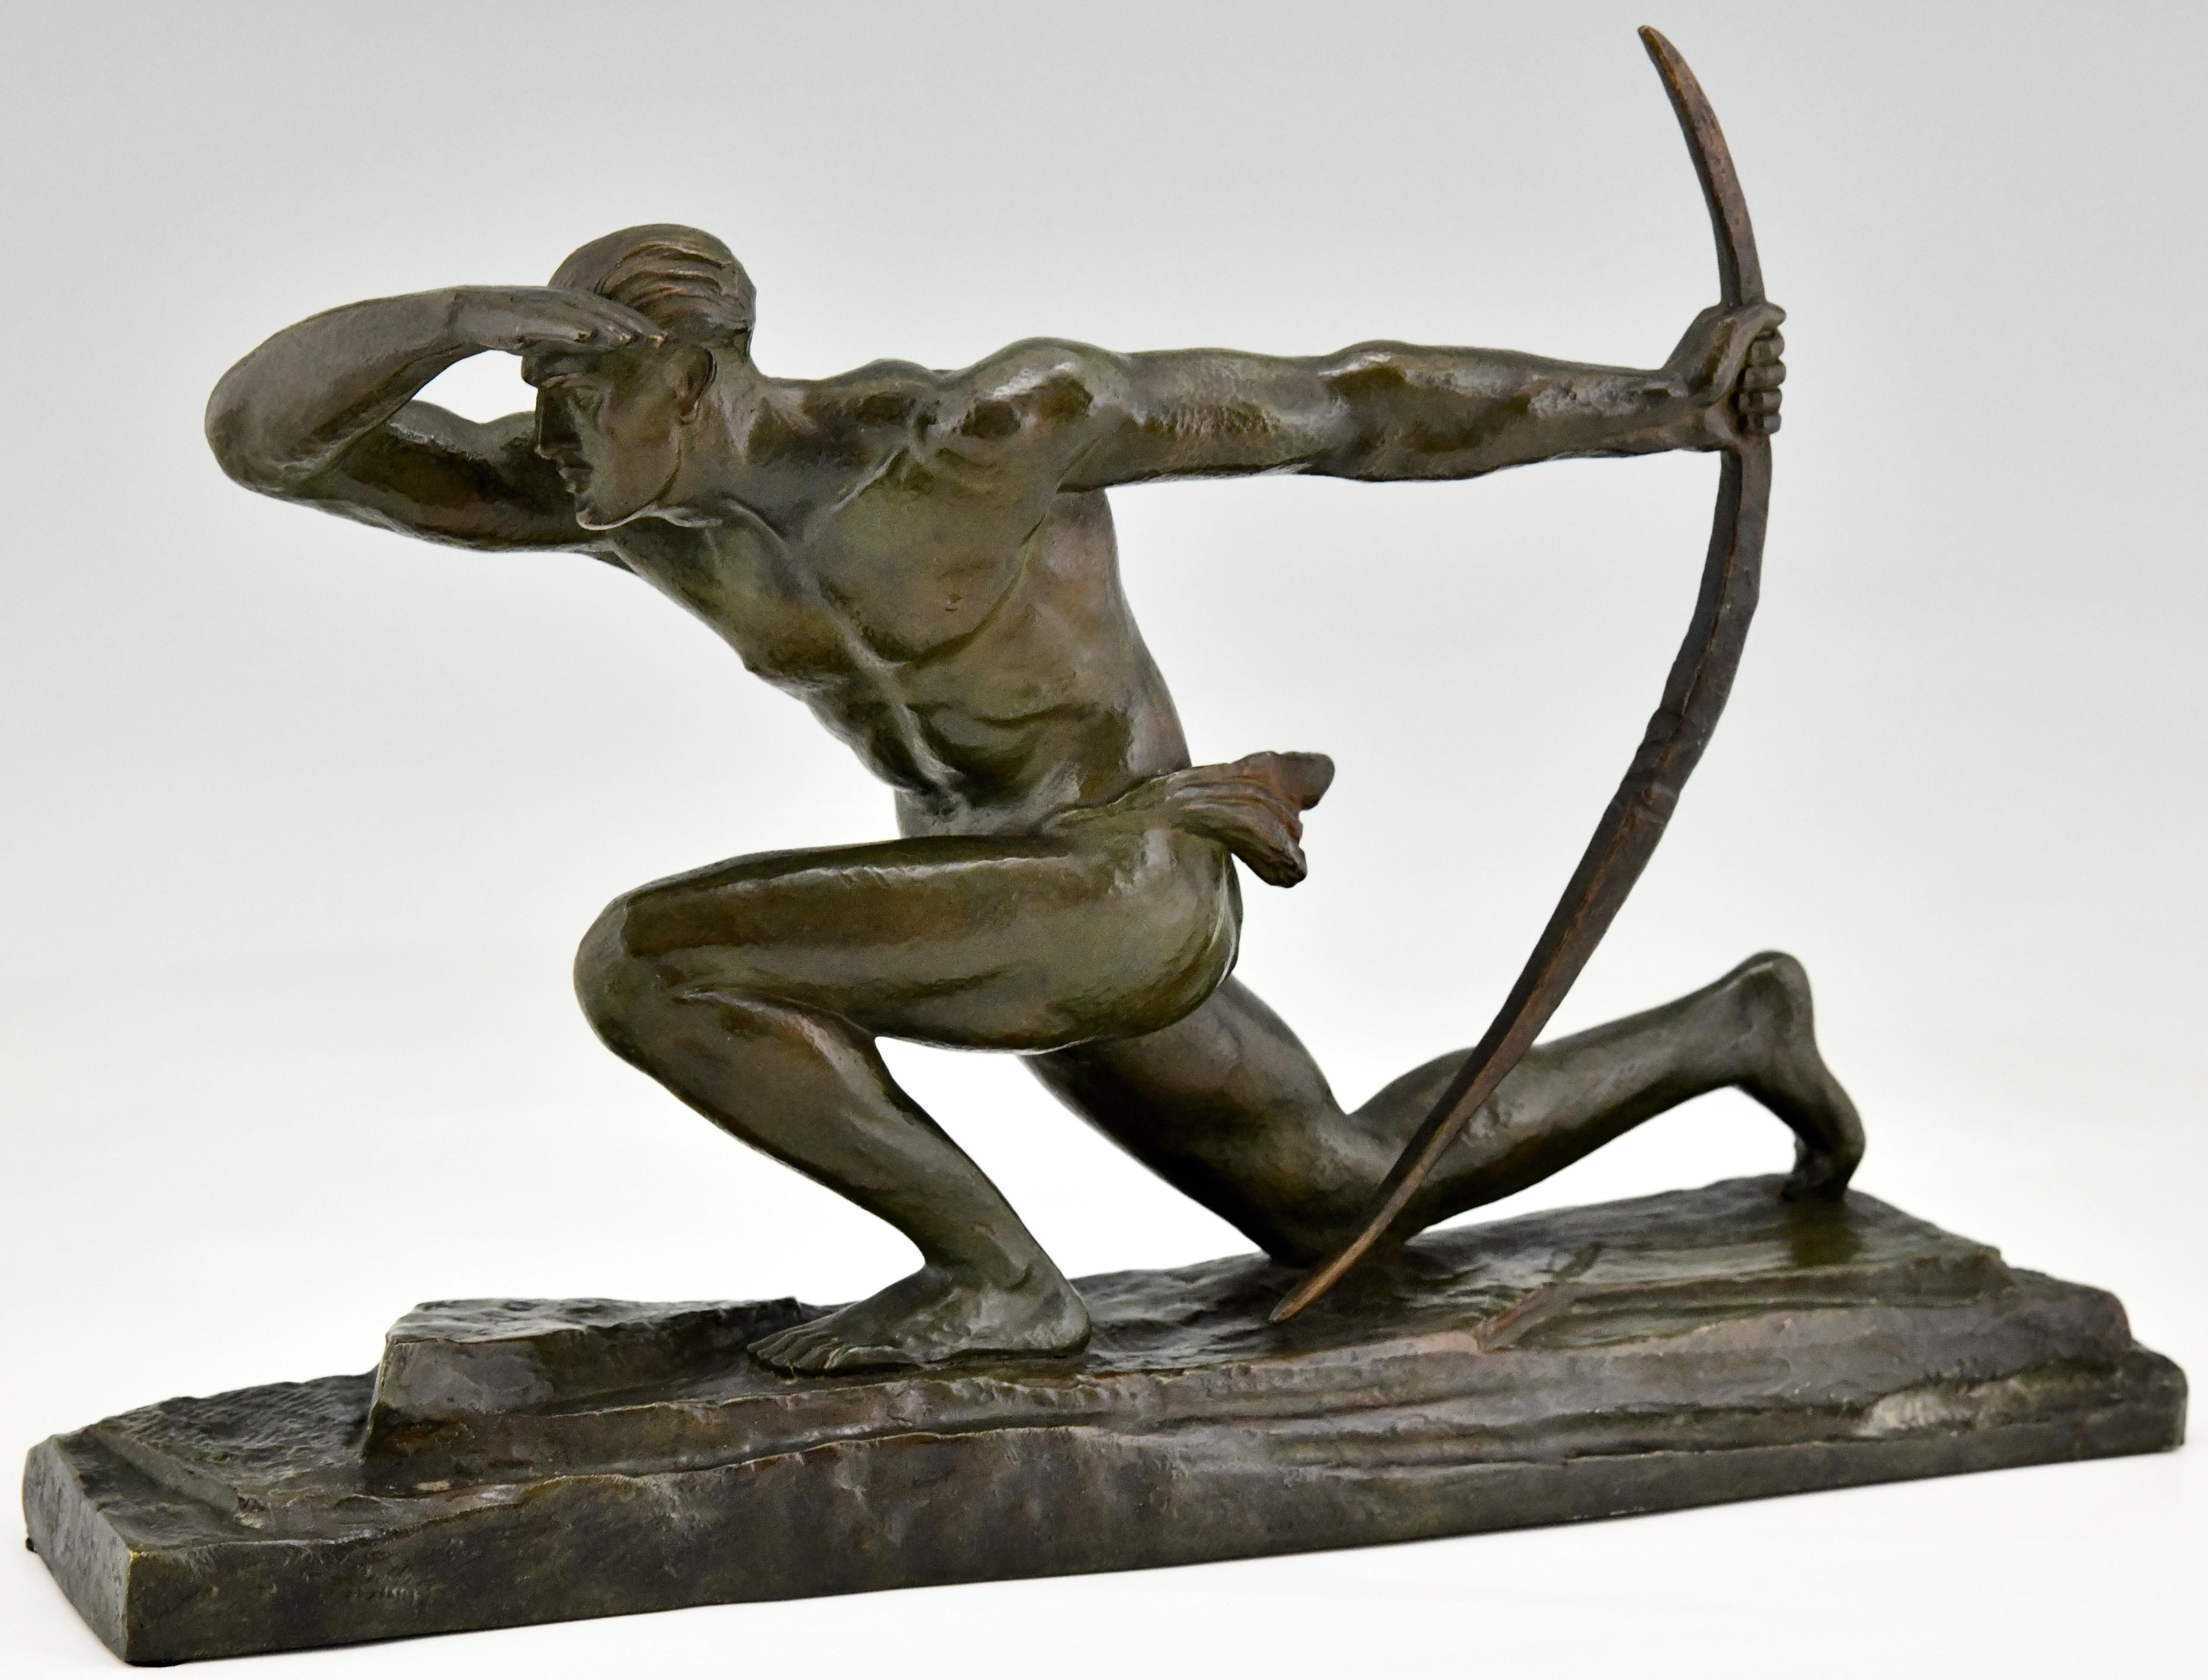 Art deco bronze sculpture athlete with bow, archer. By Pierre Le Faguays. Bronze with green patina. France 1930. Signed and with stamped number.
Literature:
Bronzes, sculptors and founders by H. Berman, Abage. Art Deco sculpture by Victor Arwas,